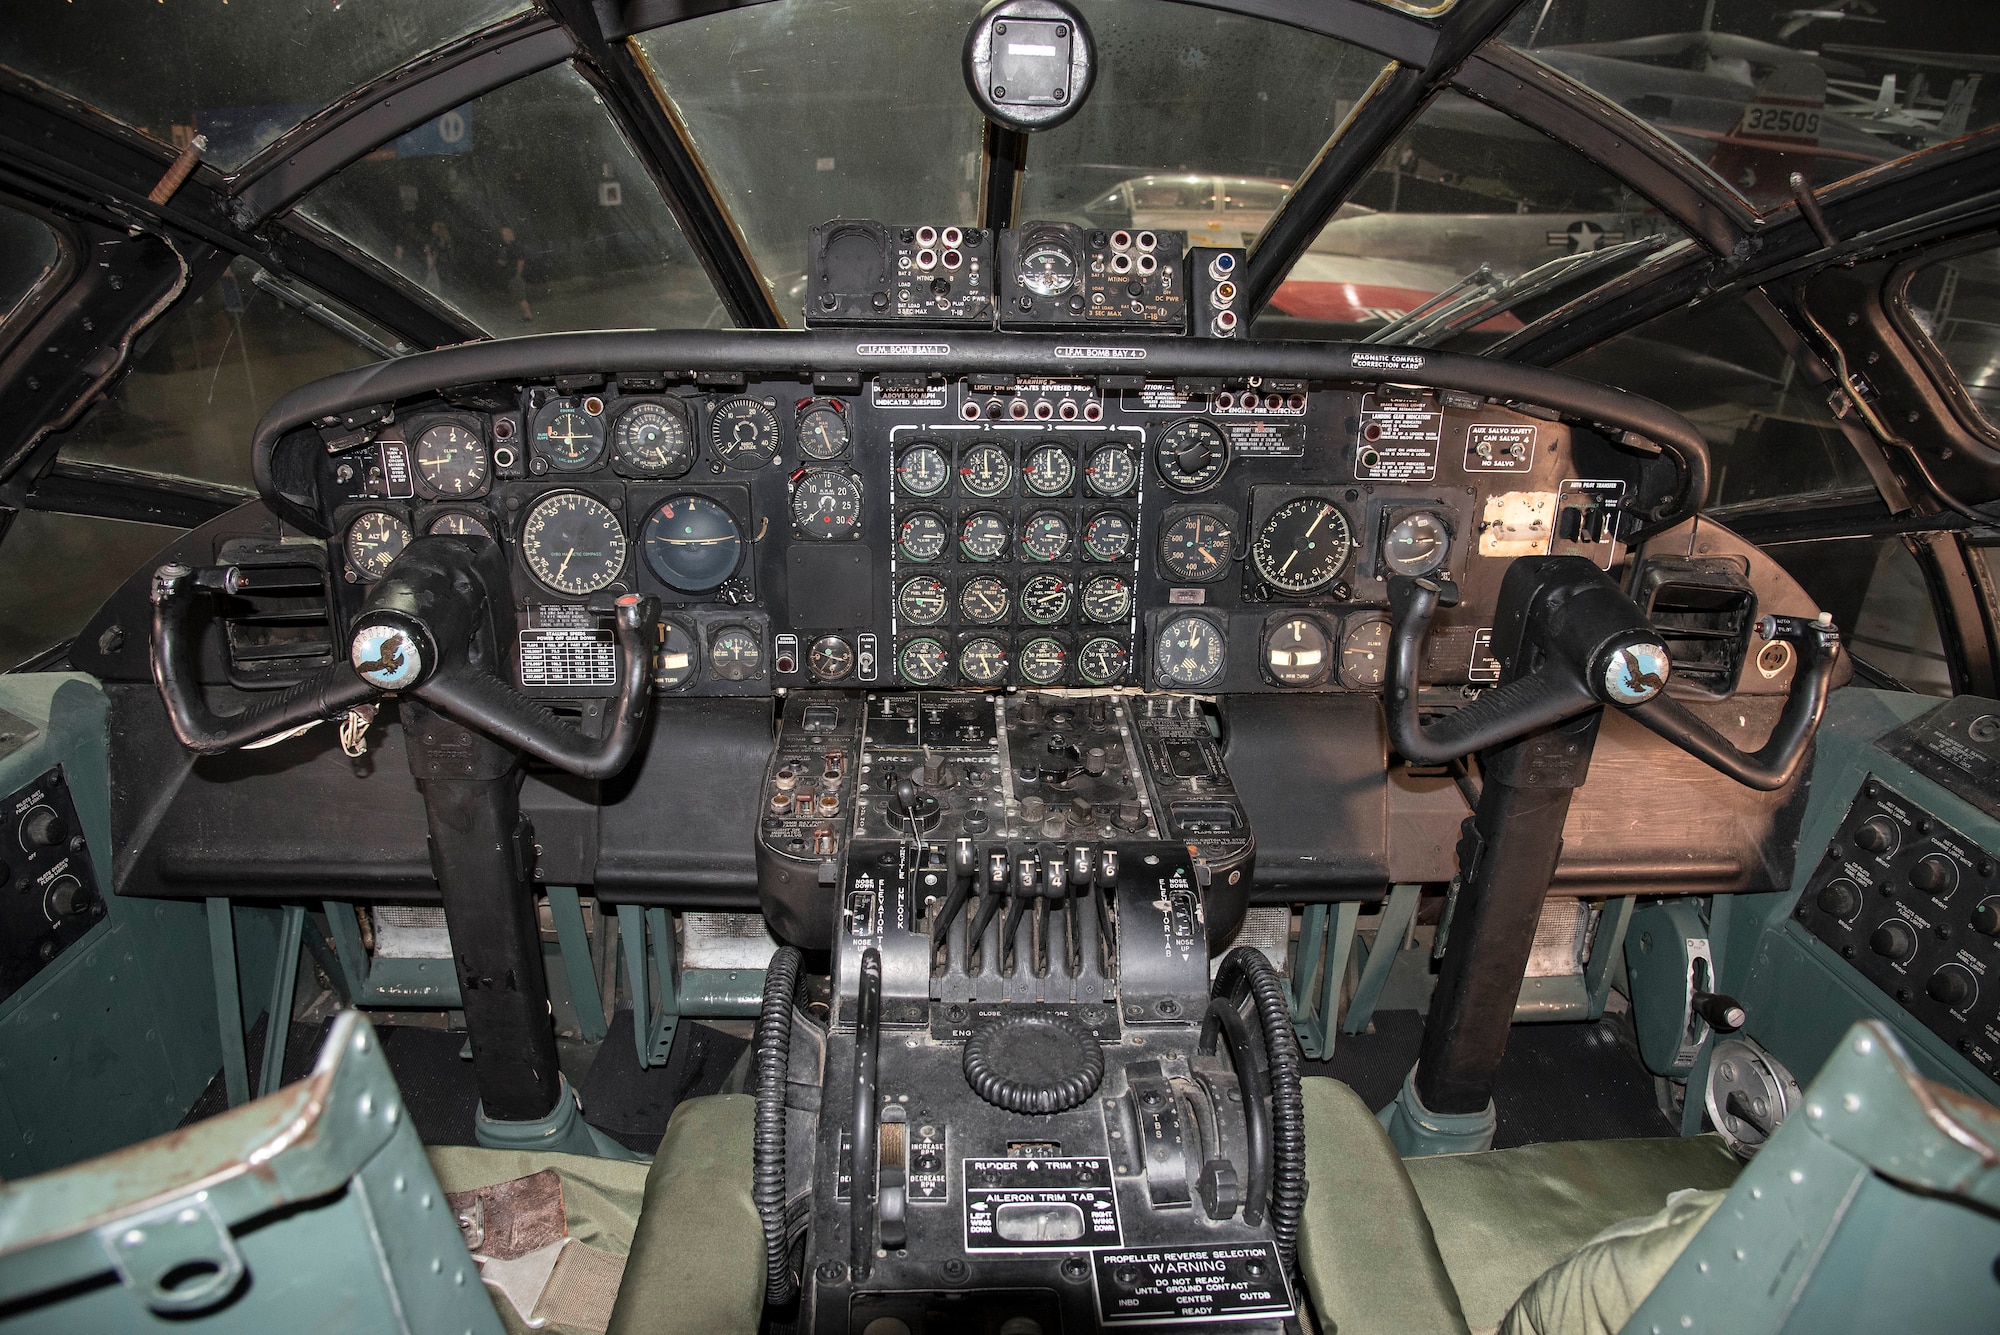 DAYTON, Ohio - Convair B-36J Peacemaker pilot station at the National Museum of the U.S. Air Force. (U.S. Air Force photo by Ken LaRock)